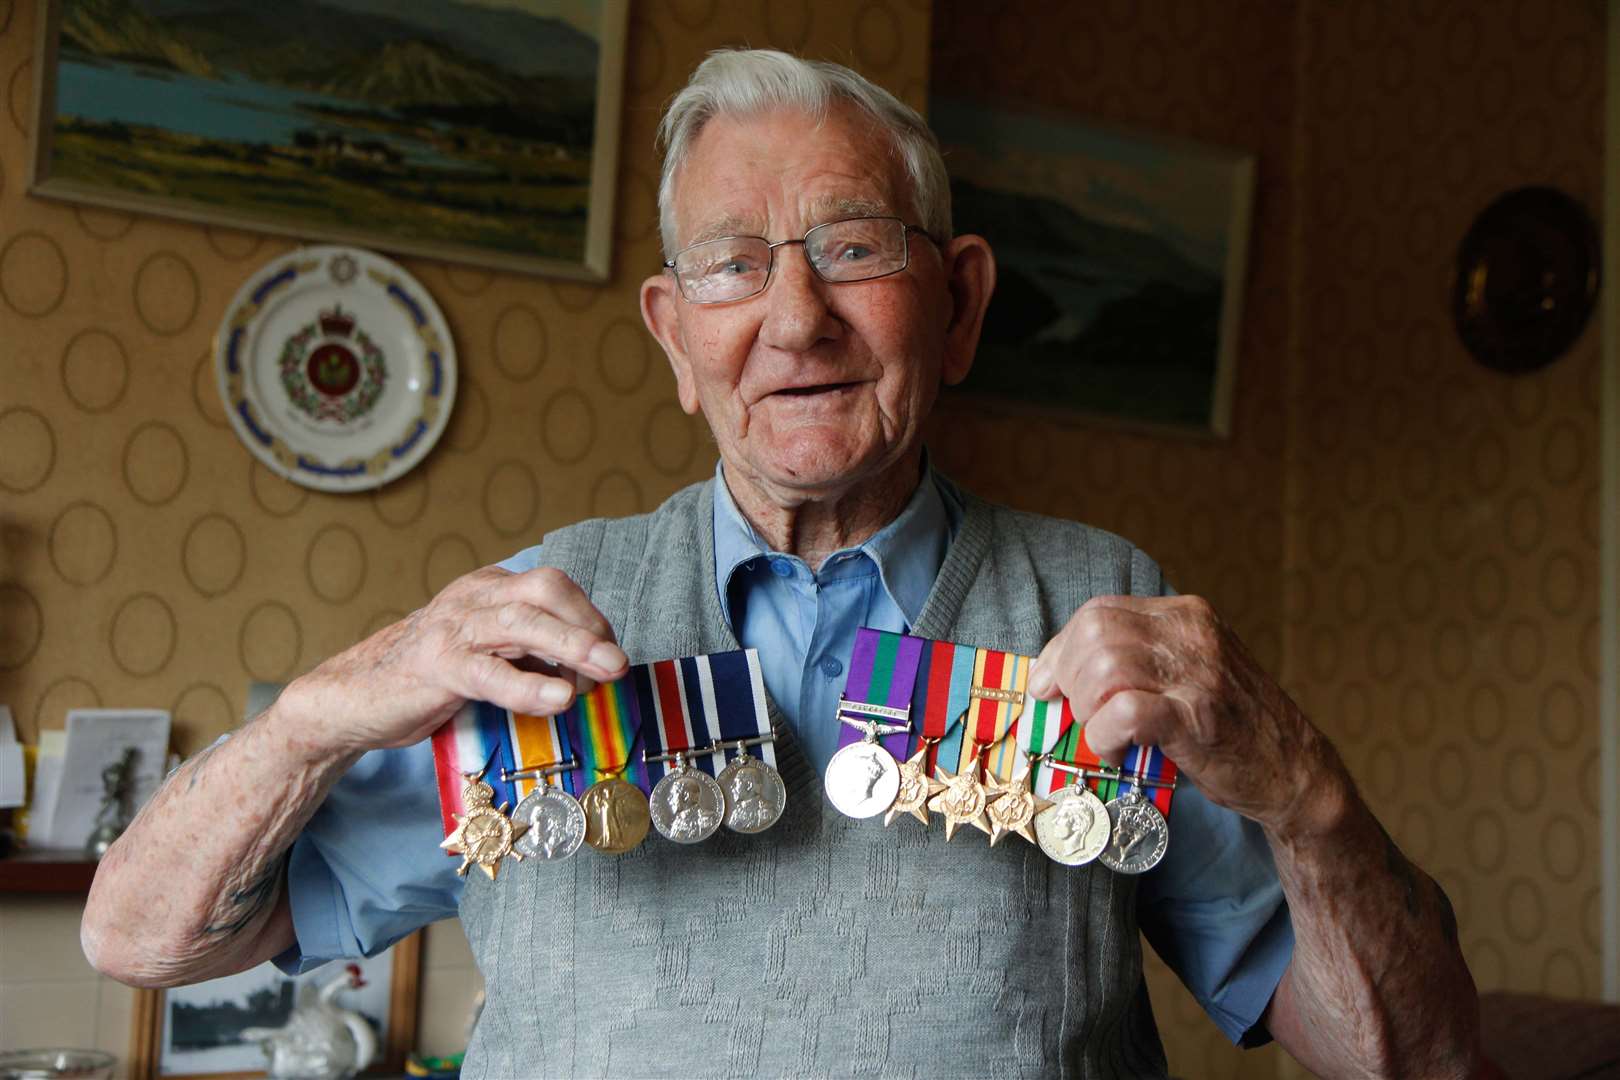 Happier times: When Leslie Stelfox was reunited with his war medals, which were recovered by police five years ago